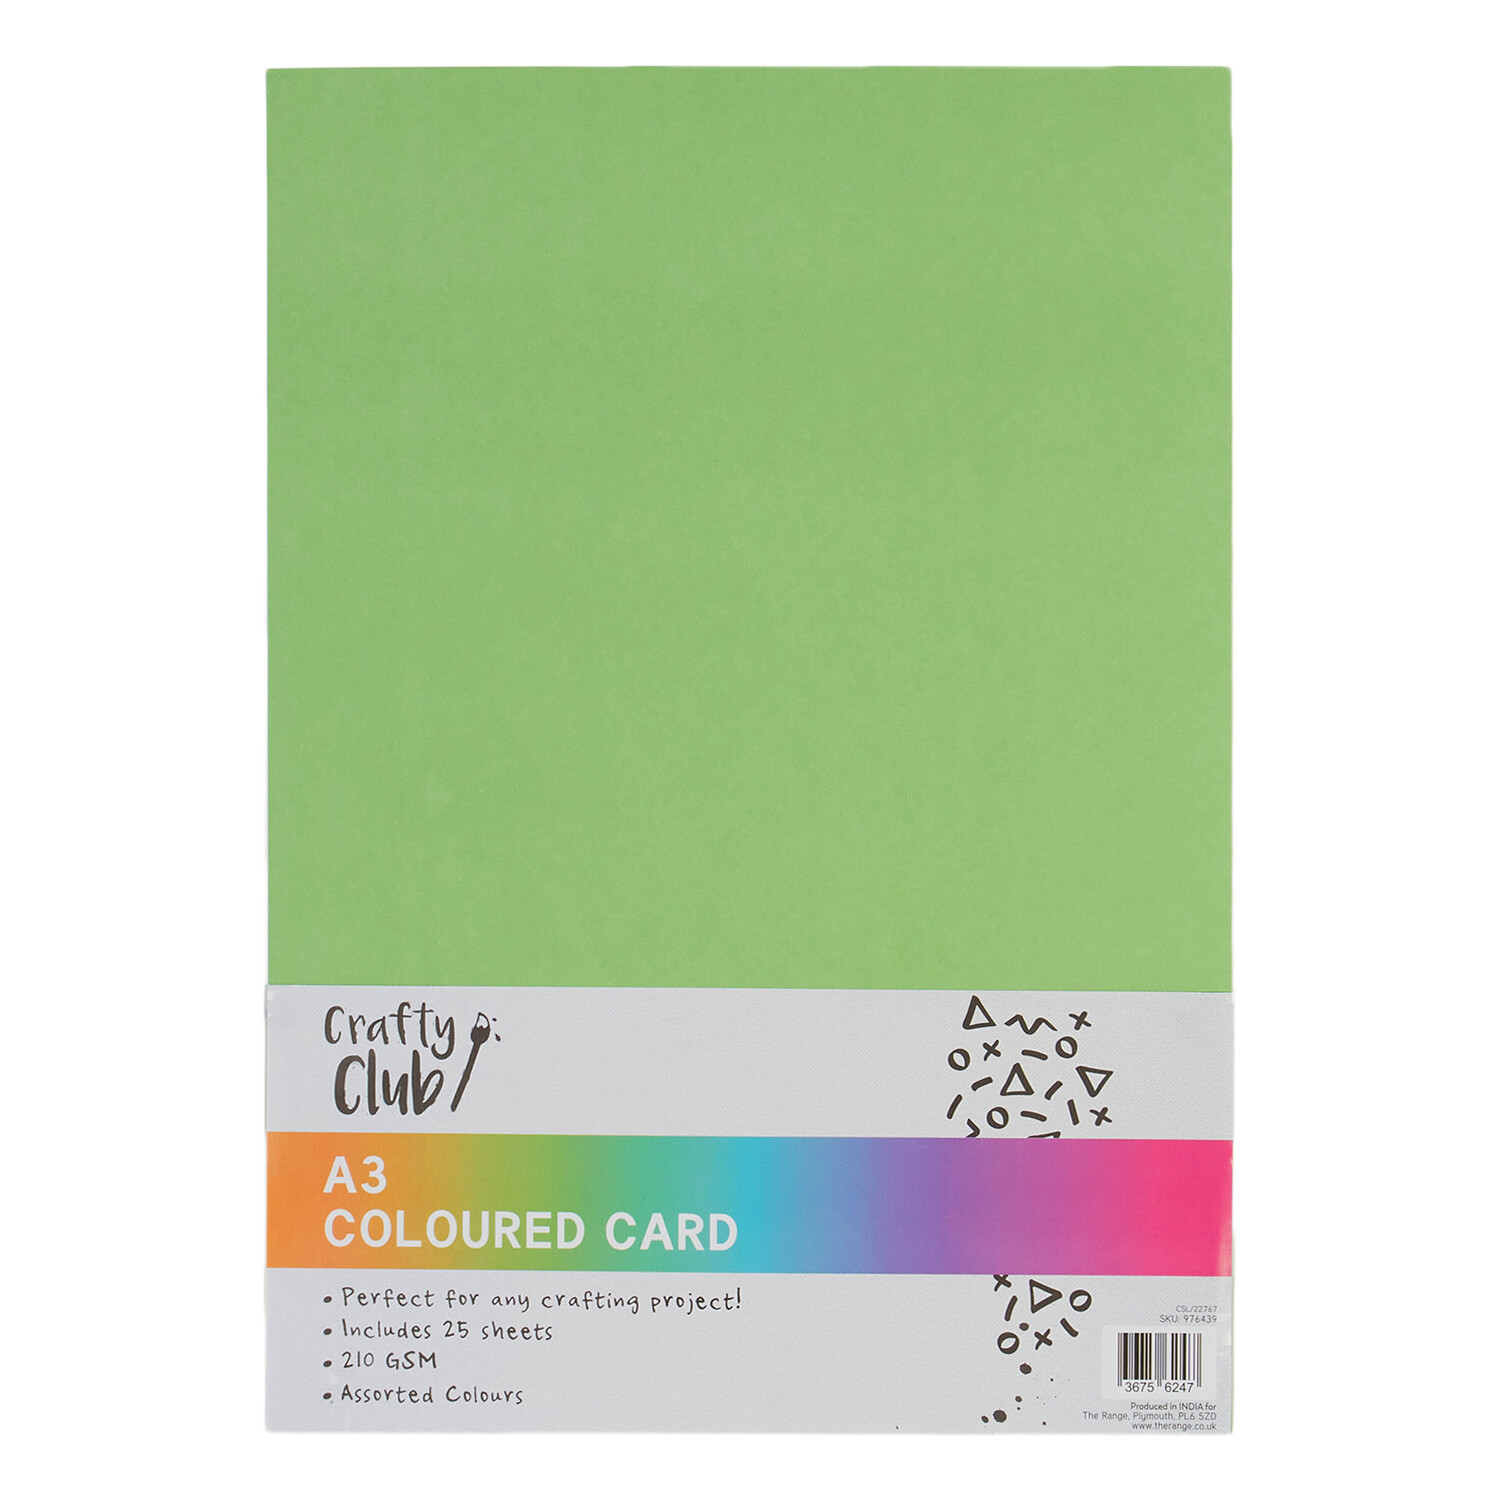 Single Crafty Club A3 Coloured Cards 25 Pack in Assorted styles Image 3